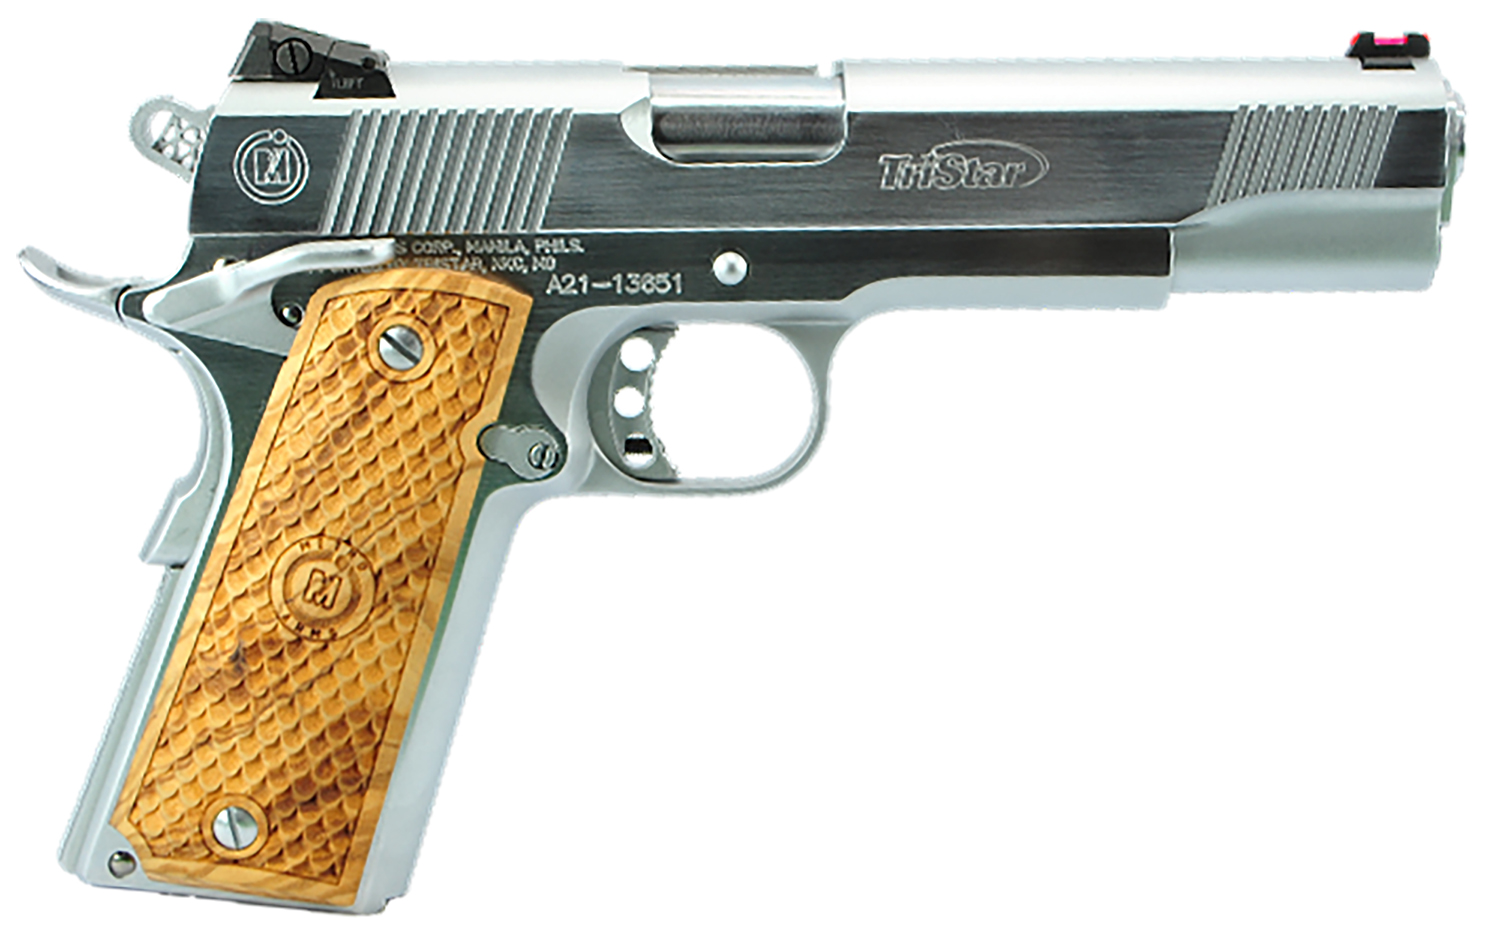 TriStar 85635 American Classic Trophy 1911 45 ACP Caliber with 5